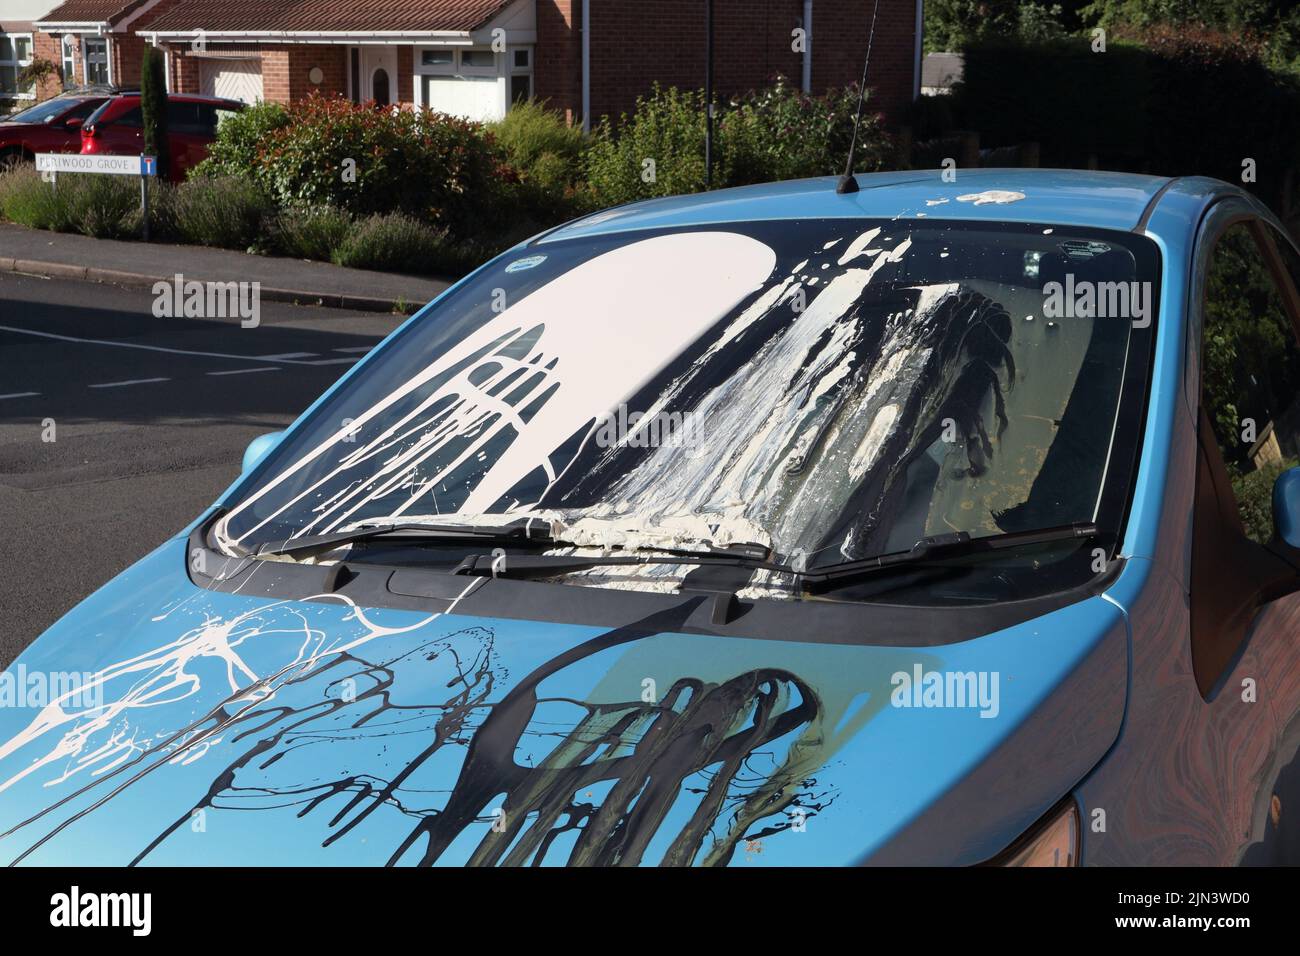 Car vandalised with paint thrown all over the windscreen and bonnet damaged. In England. A vandalised car vehicle Stock Photo